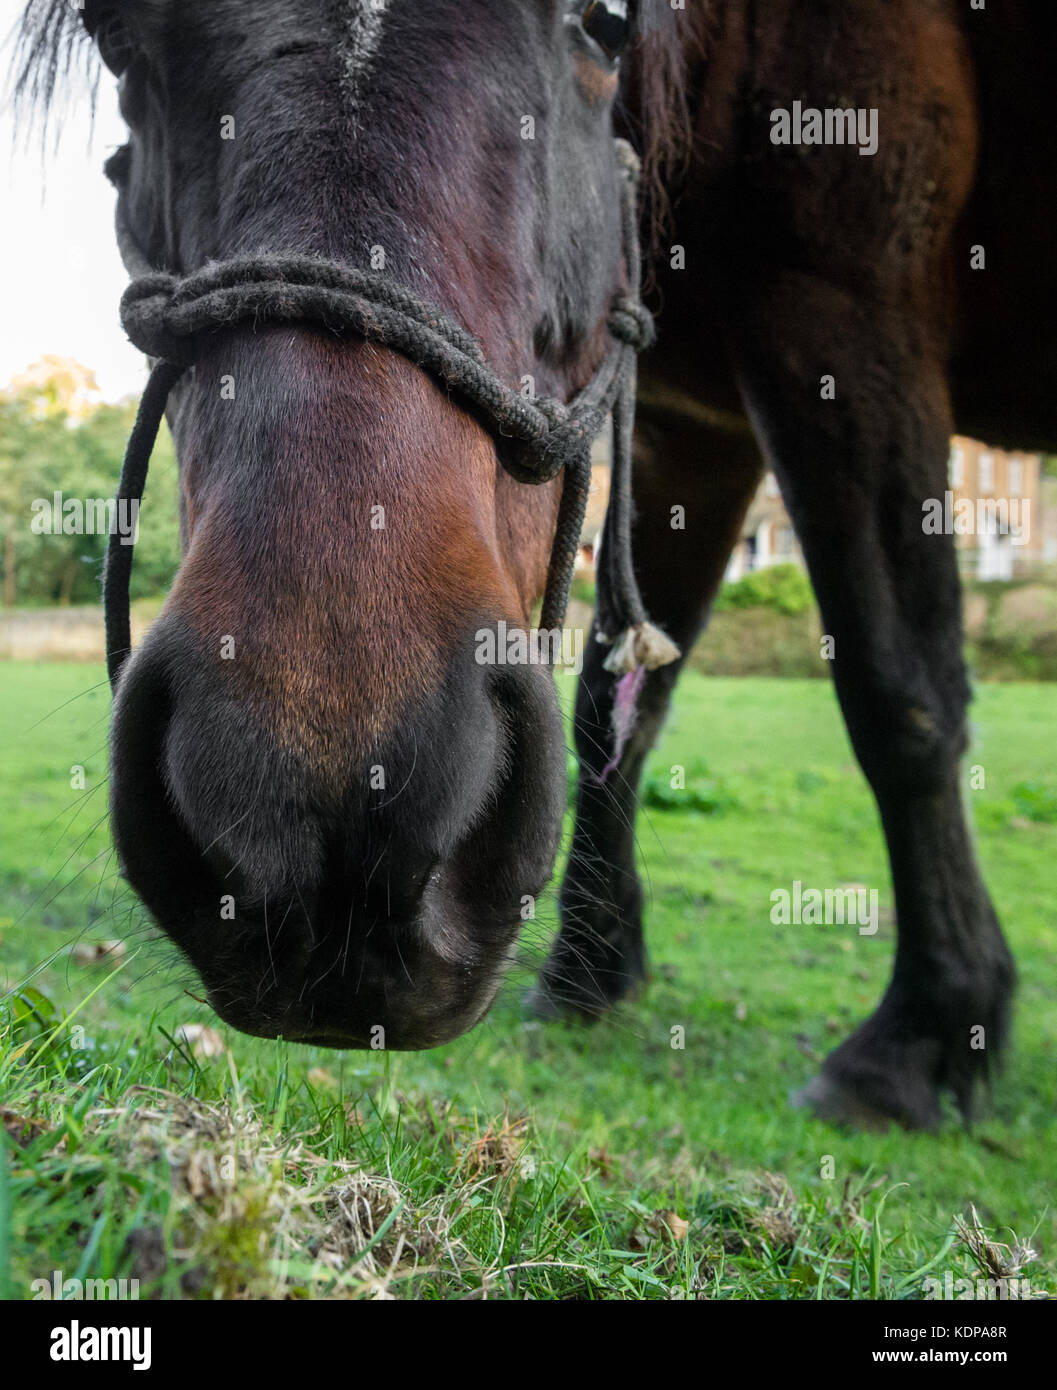 Horse eating grass. Stock Photo